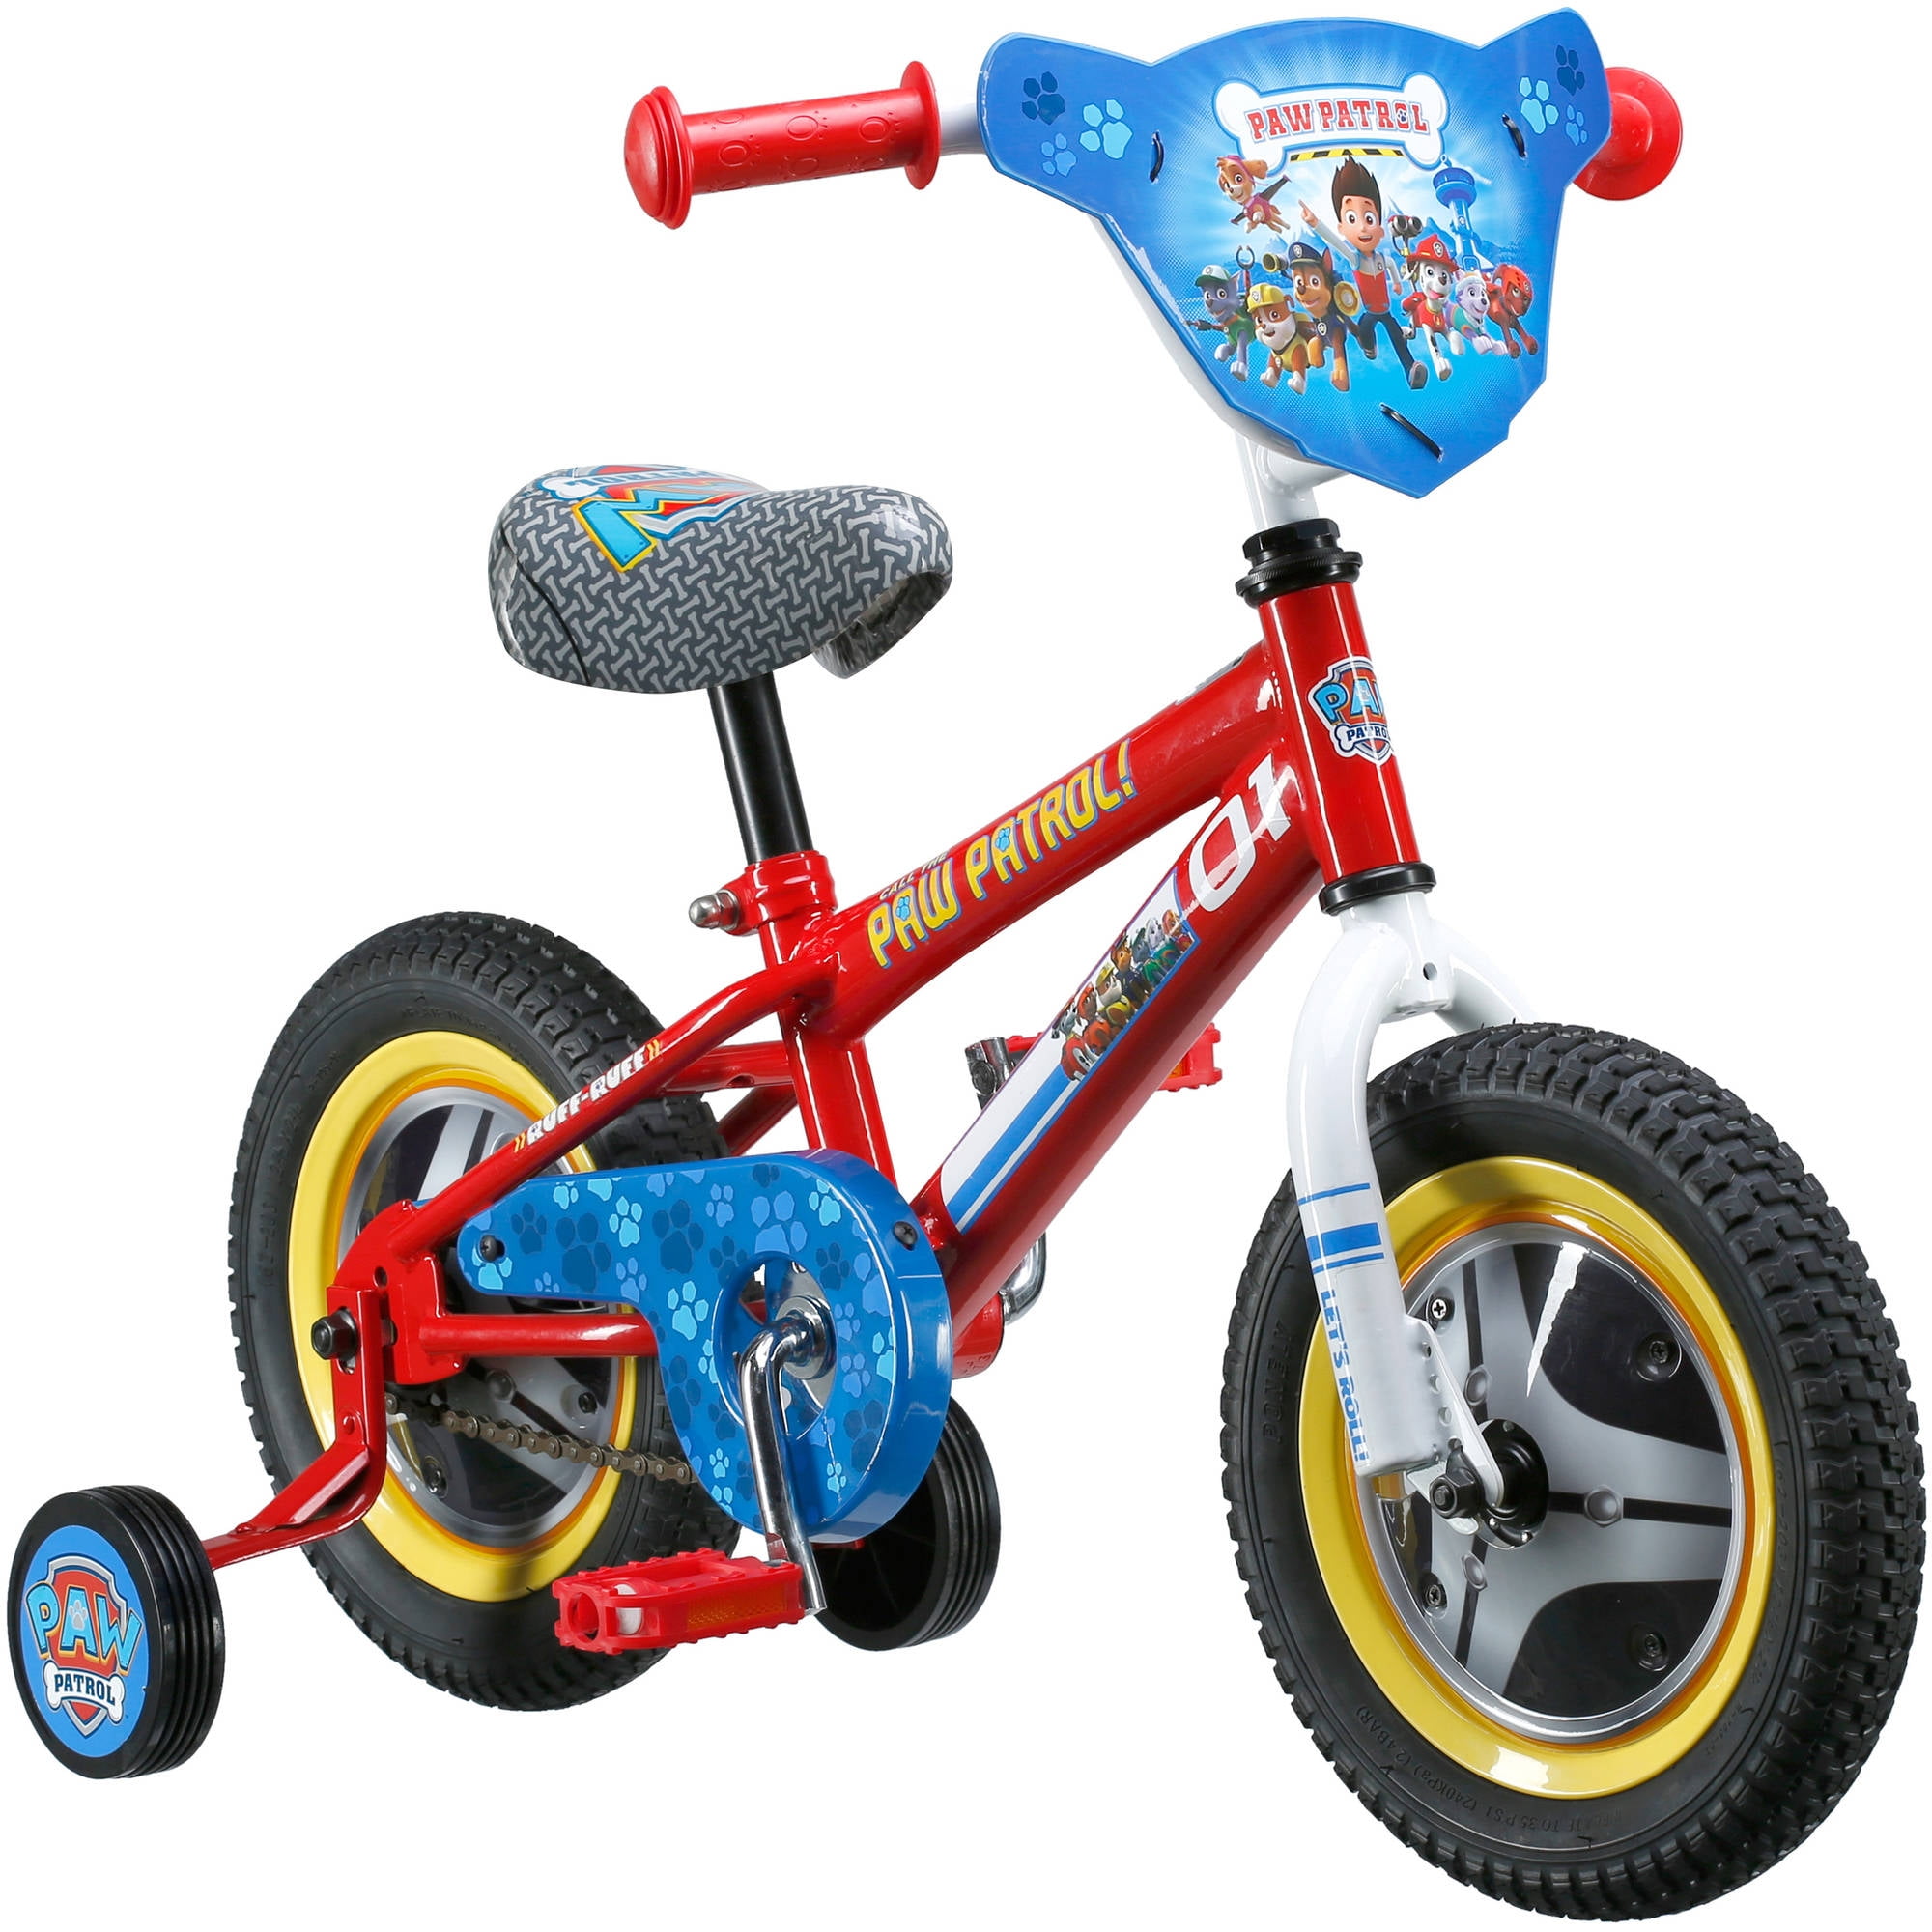 paw patrol bicycle 16 inch Cheaper Than Retail Price> Buy Clothing